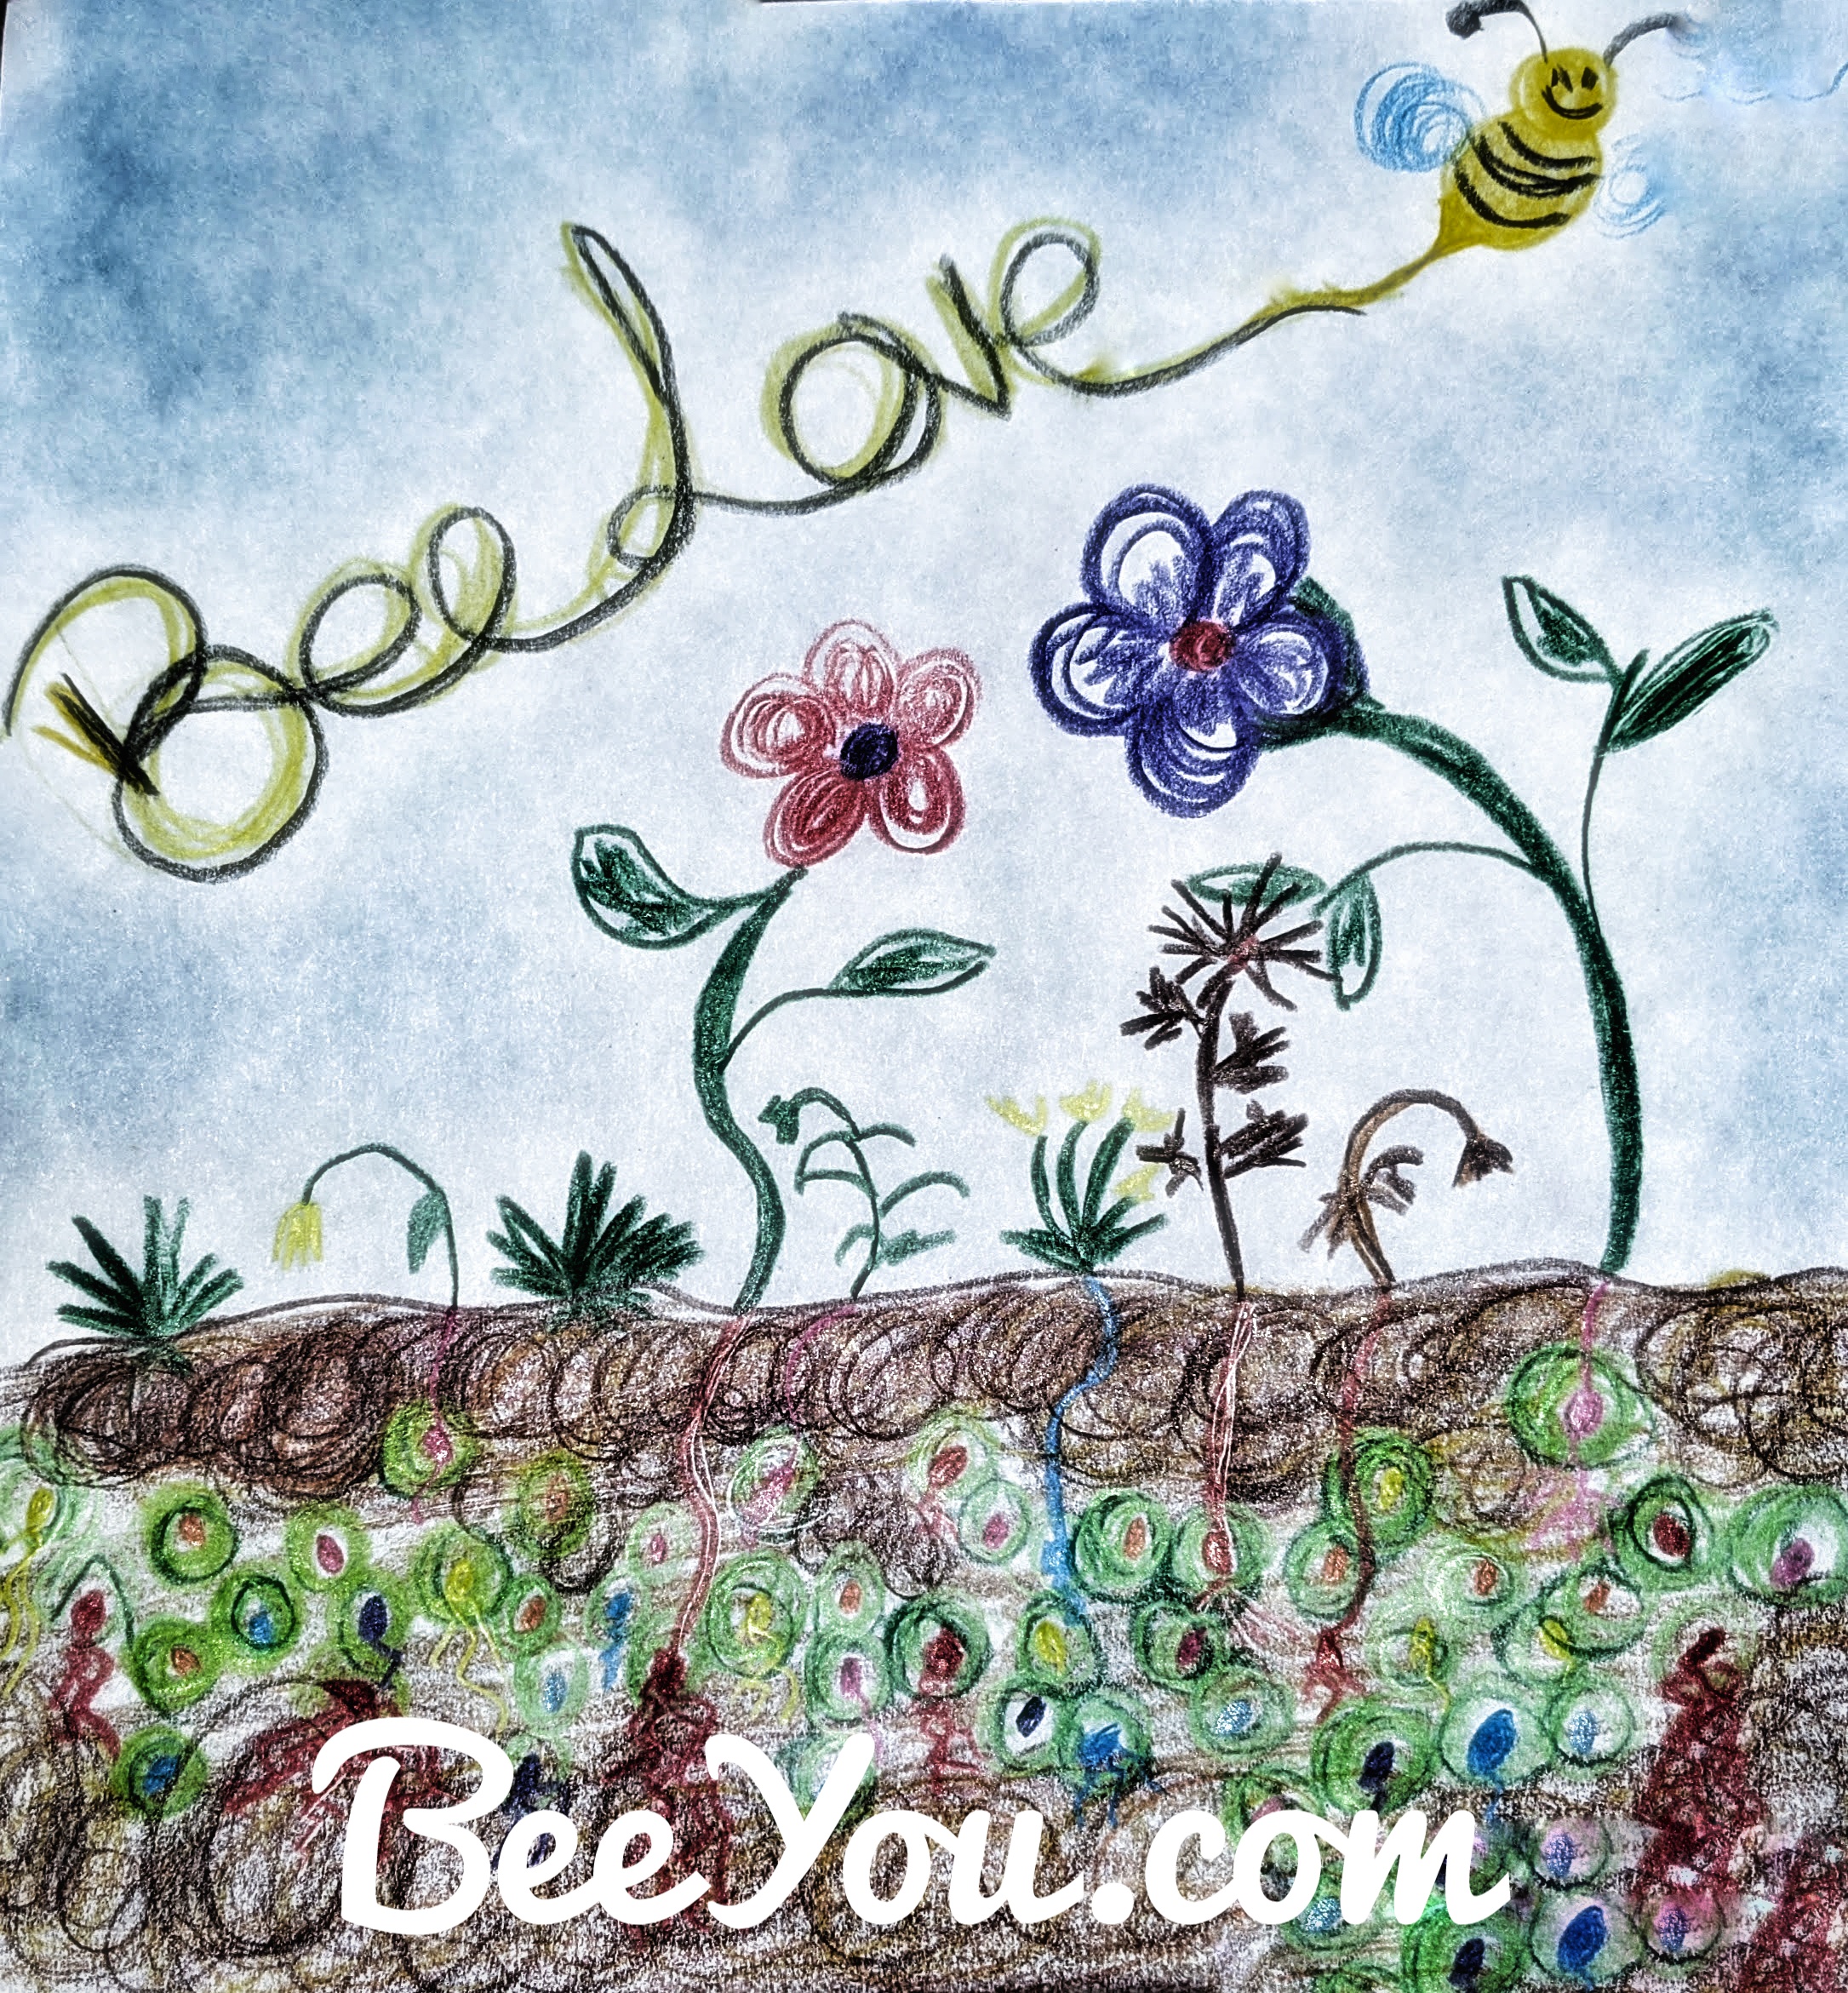 Bee You Yoga and Wellness - Yoga Therapy, Yoga, Yoga for anxiety, Yoga for depression, Yoga for recovery, y12sr, donation based yoga & meditation for everyone, kids yoga, BARRE, Sadie Nardini Yoga Shred Fusion, Full body conditioning, Yoga Nidra, Swedish massage, myofascial release, PSYCH-K, Reiki, BARRE, ZUMBA, Yoga Shred, Bee You Yoga, Yoga 07885, Yoga 07869, Randolph, Roxbury, Mine Hill, New Jersey, North Jersey, Morris County, Yoga Morris County, Buti Yoga, yogassage, theta healing, therapeutic massage, massage gift certifcates, 07803,07806,07847,07802,07869,07876,07852,07856,07850,07885,07845,07801,07970,07857,07843,07836,07834,07842,07926,07950,07878,07945,07849,07874,07837,07866,07930,07828,07046,07963,07962,07927,07960,07821,07005,07981,07054,07924,07961,07820,07034,07840,07438,07931,07976,07977,07871,07879,07934,07939,07045,07870,07853,07940,07935,07932,07936,07839,07082,07058,07405,07439,07979,07933,07920,07946,07980,07938,07928,07880,07435,08858,07830,07039